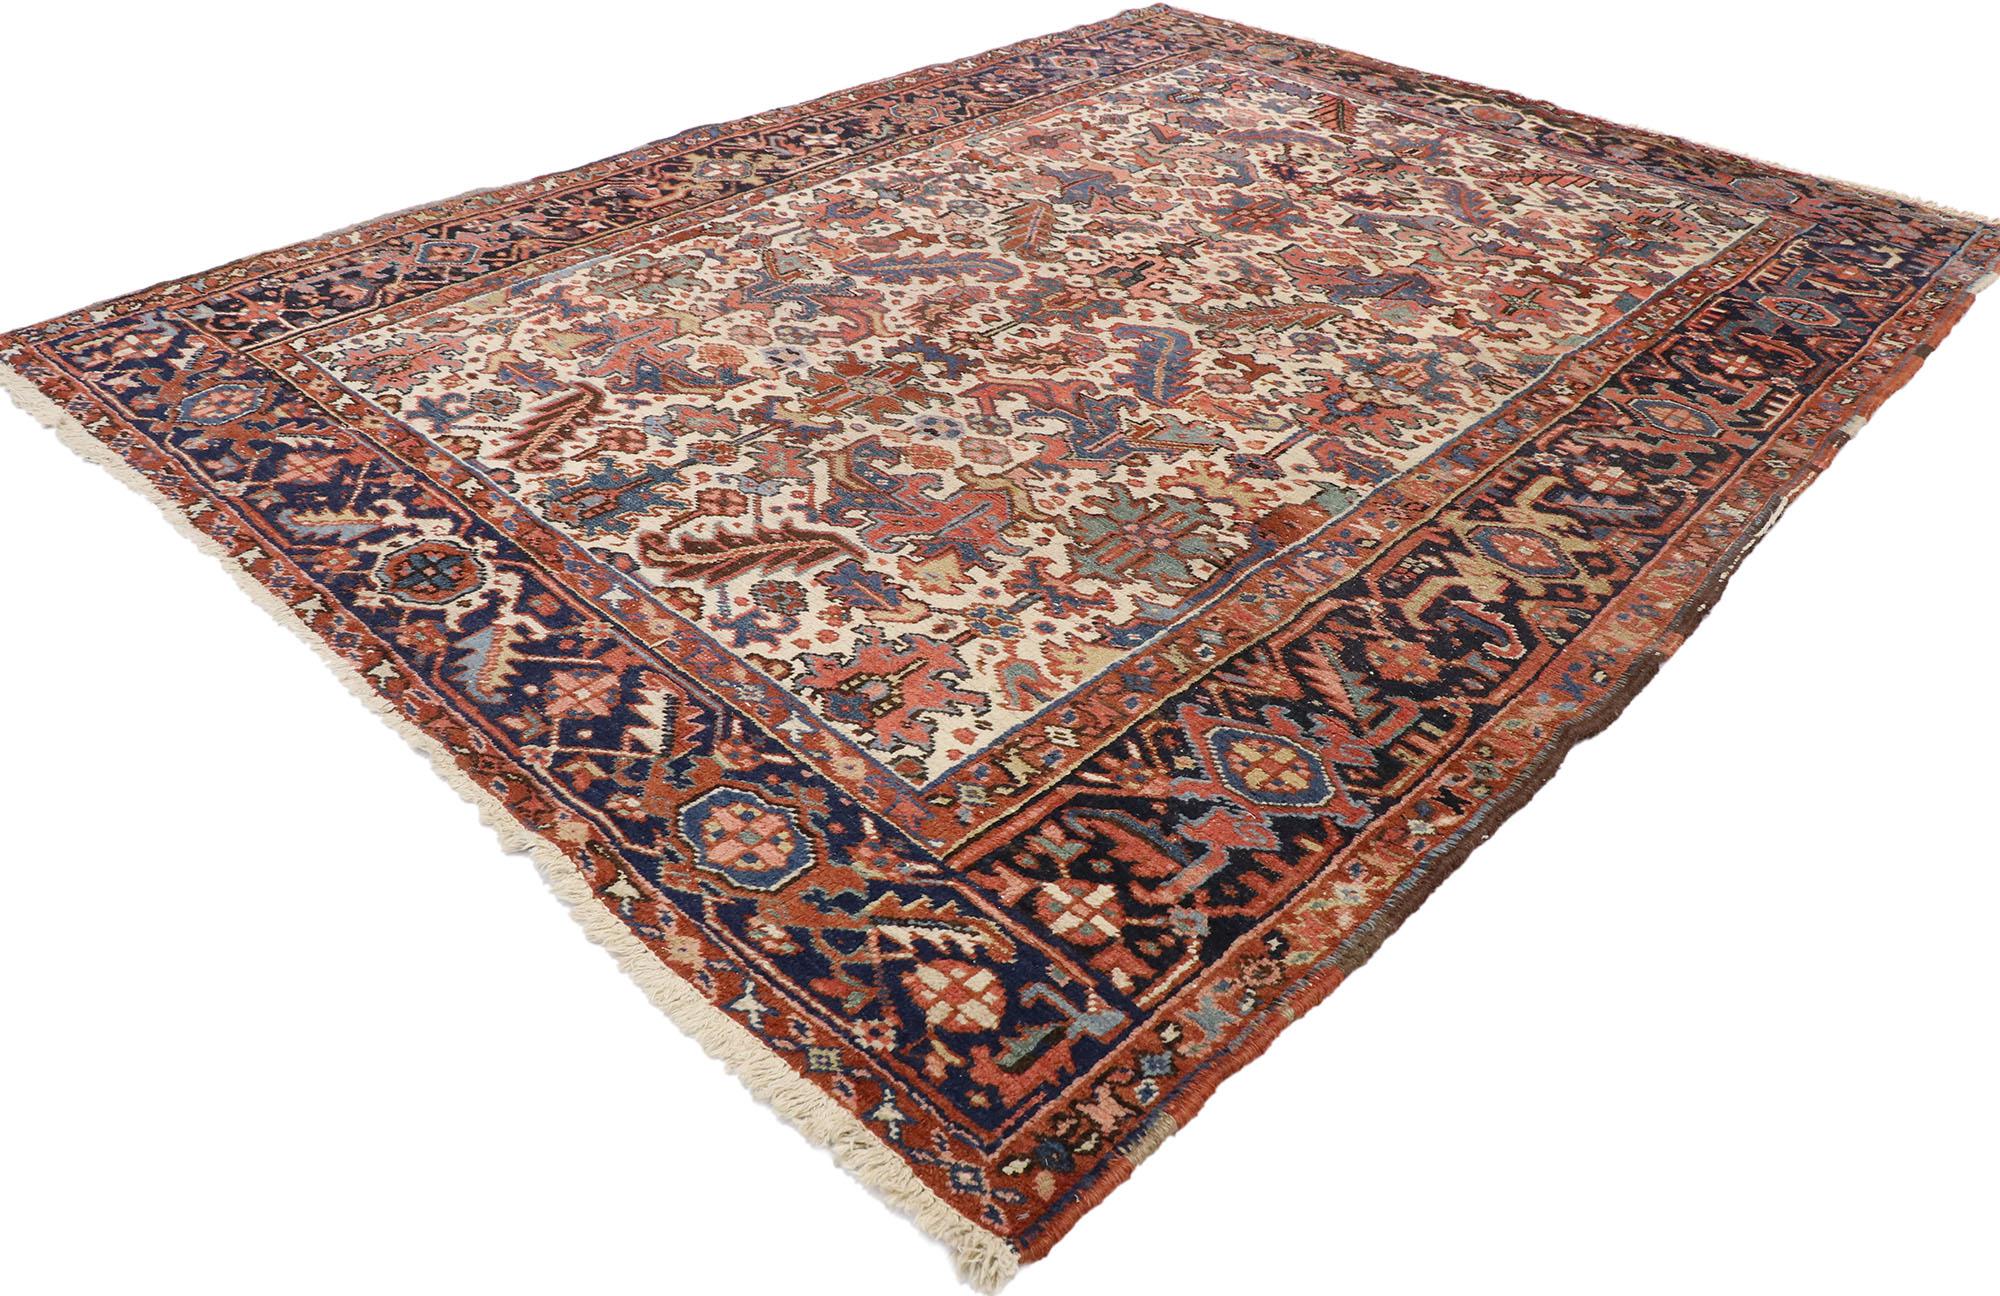 77559, antique Persian Heriz Dragon rug with Mid-Century Modern style. Bespeaking understated elegance and rustic sensibility, this hand knotted wool antique Persian Heriz dragon rug will take on a curated lived-in look that feels timeless while